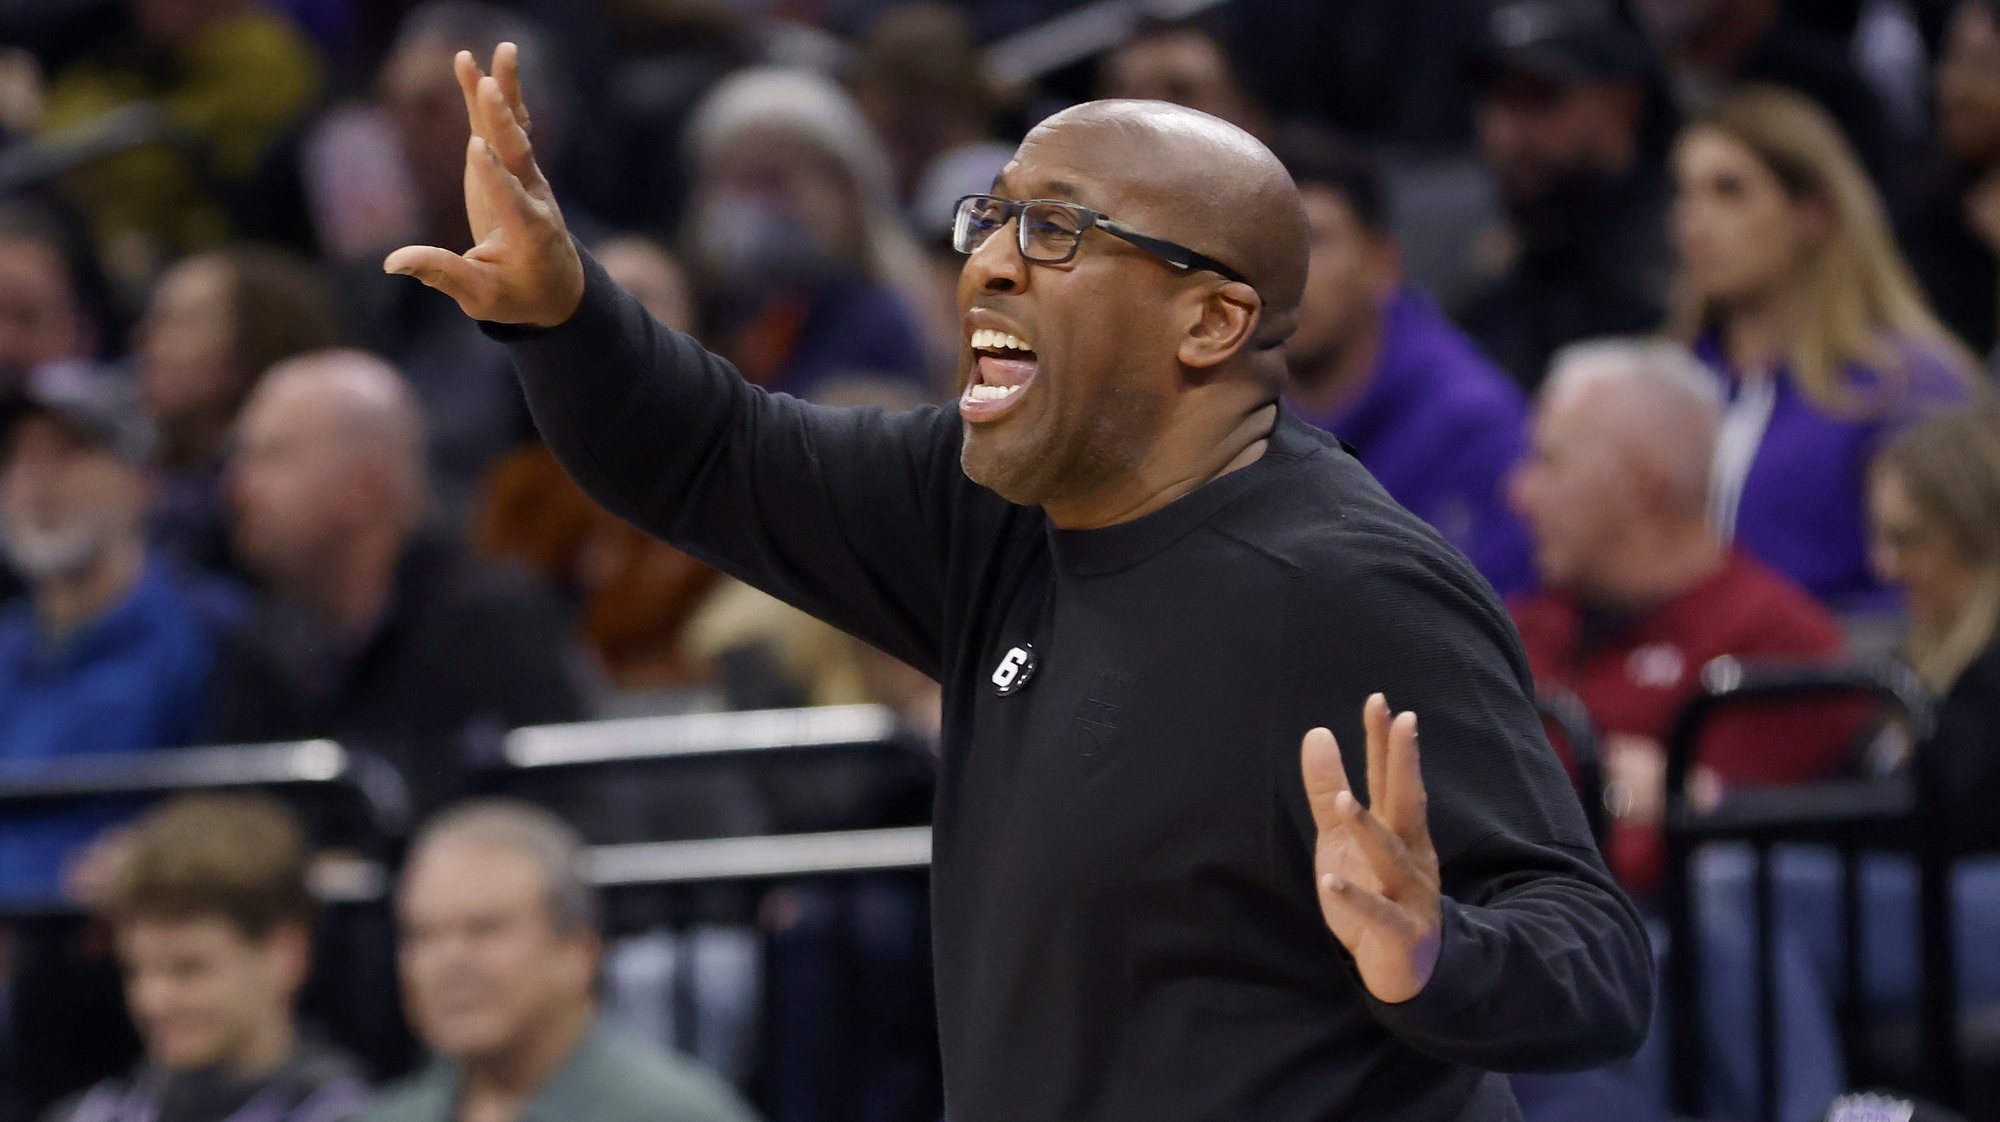 epa10501804 Sacramento Kings head coach Mike Brown yells out to the floor in a play against the LA Clippers during the first quarter of the NBA game at Golden 1 Center in Sacramento, California, USA, 03 March 2023.  EPA/JOHN G. MABANGLO  SHUTTERSTOCK OUT